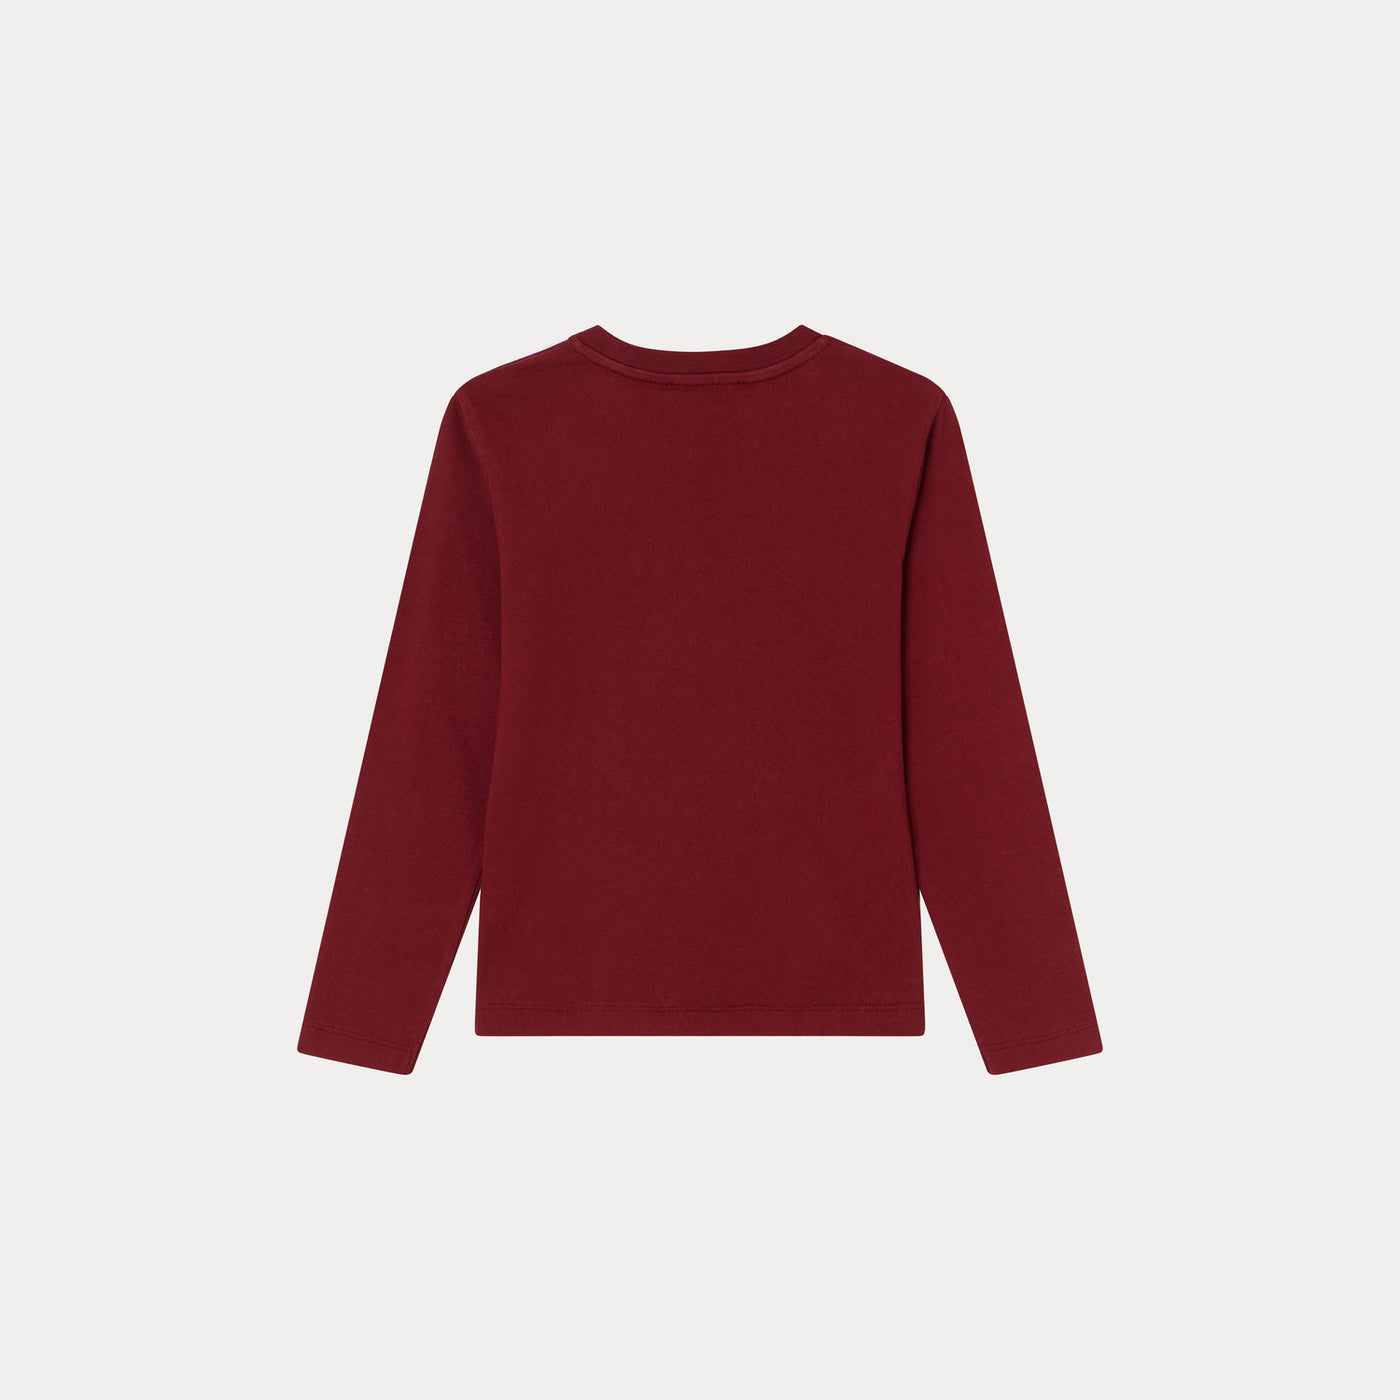 Theia T-shirt red